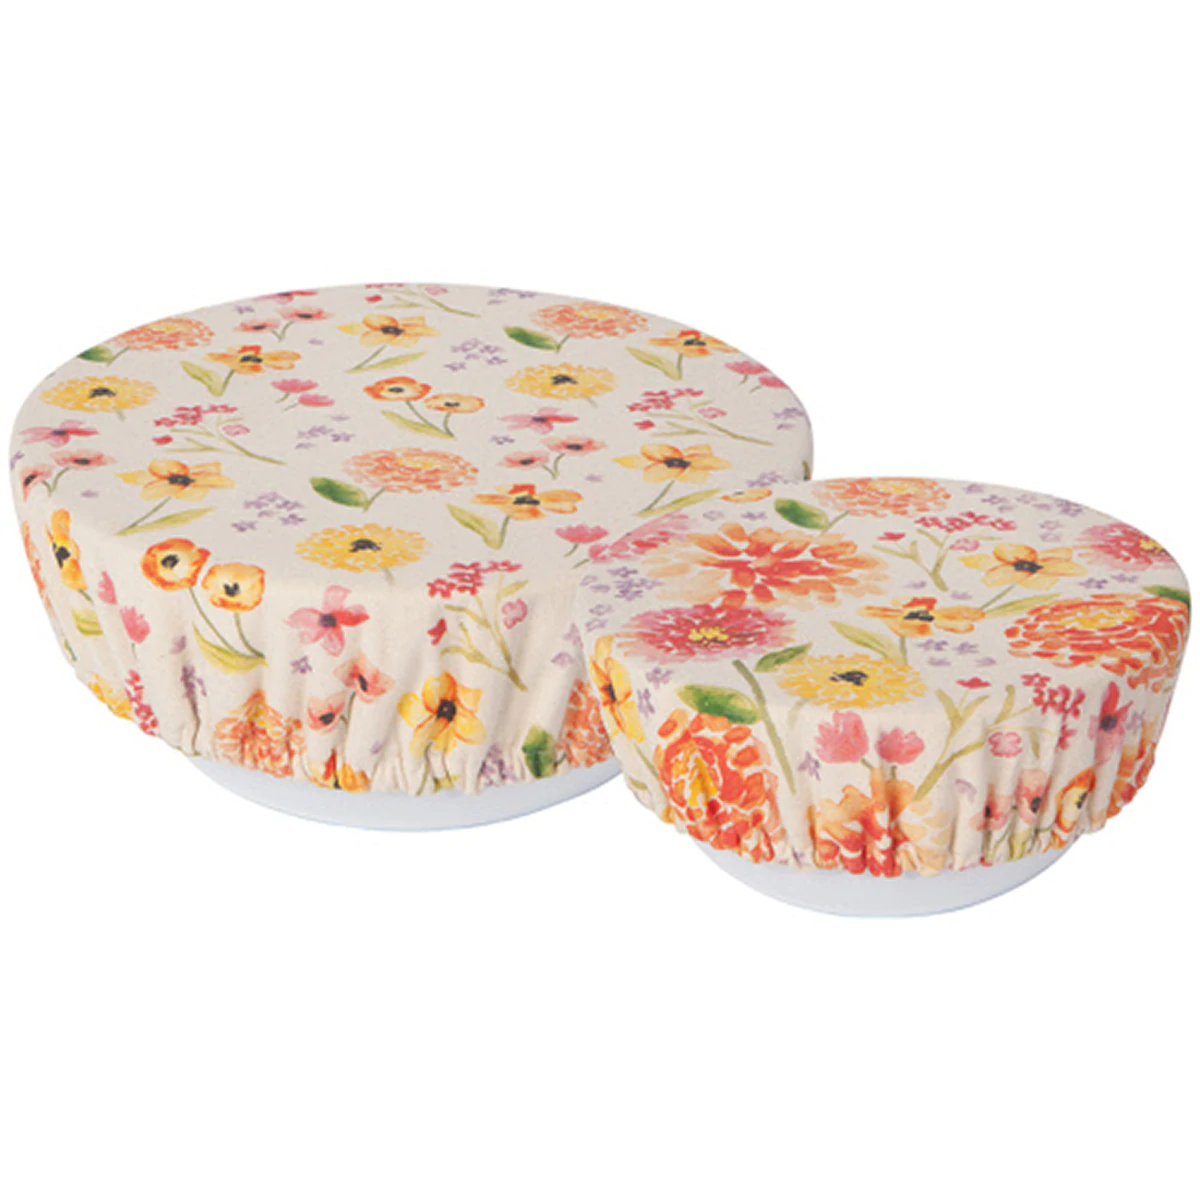 Bowl Covers, Cottage Floral Set of 2